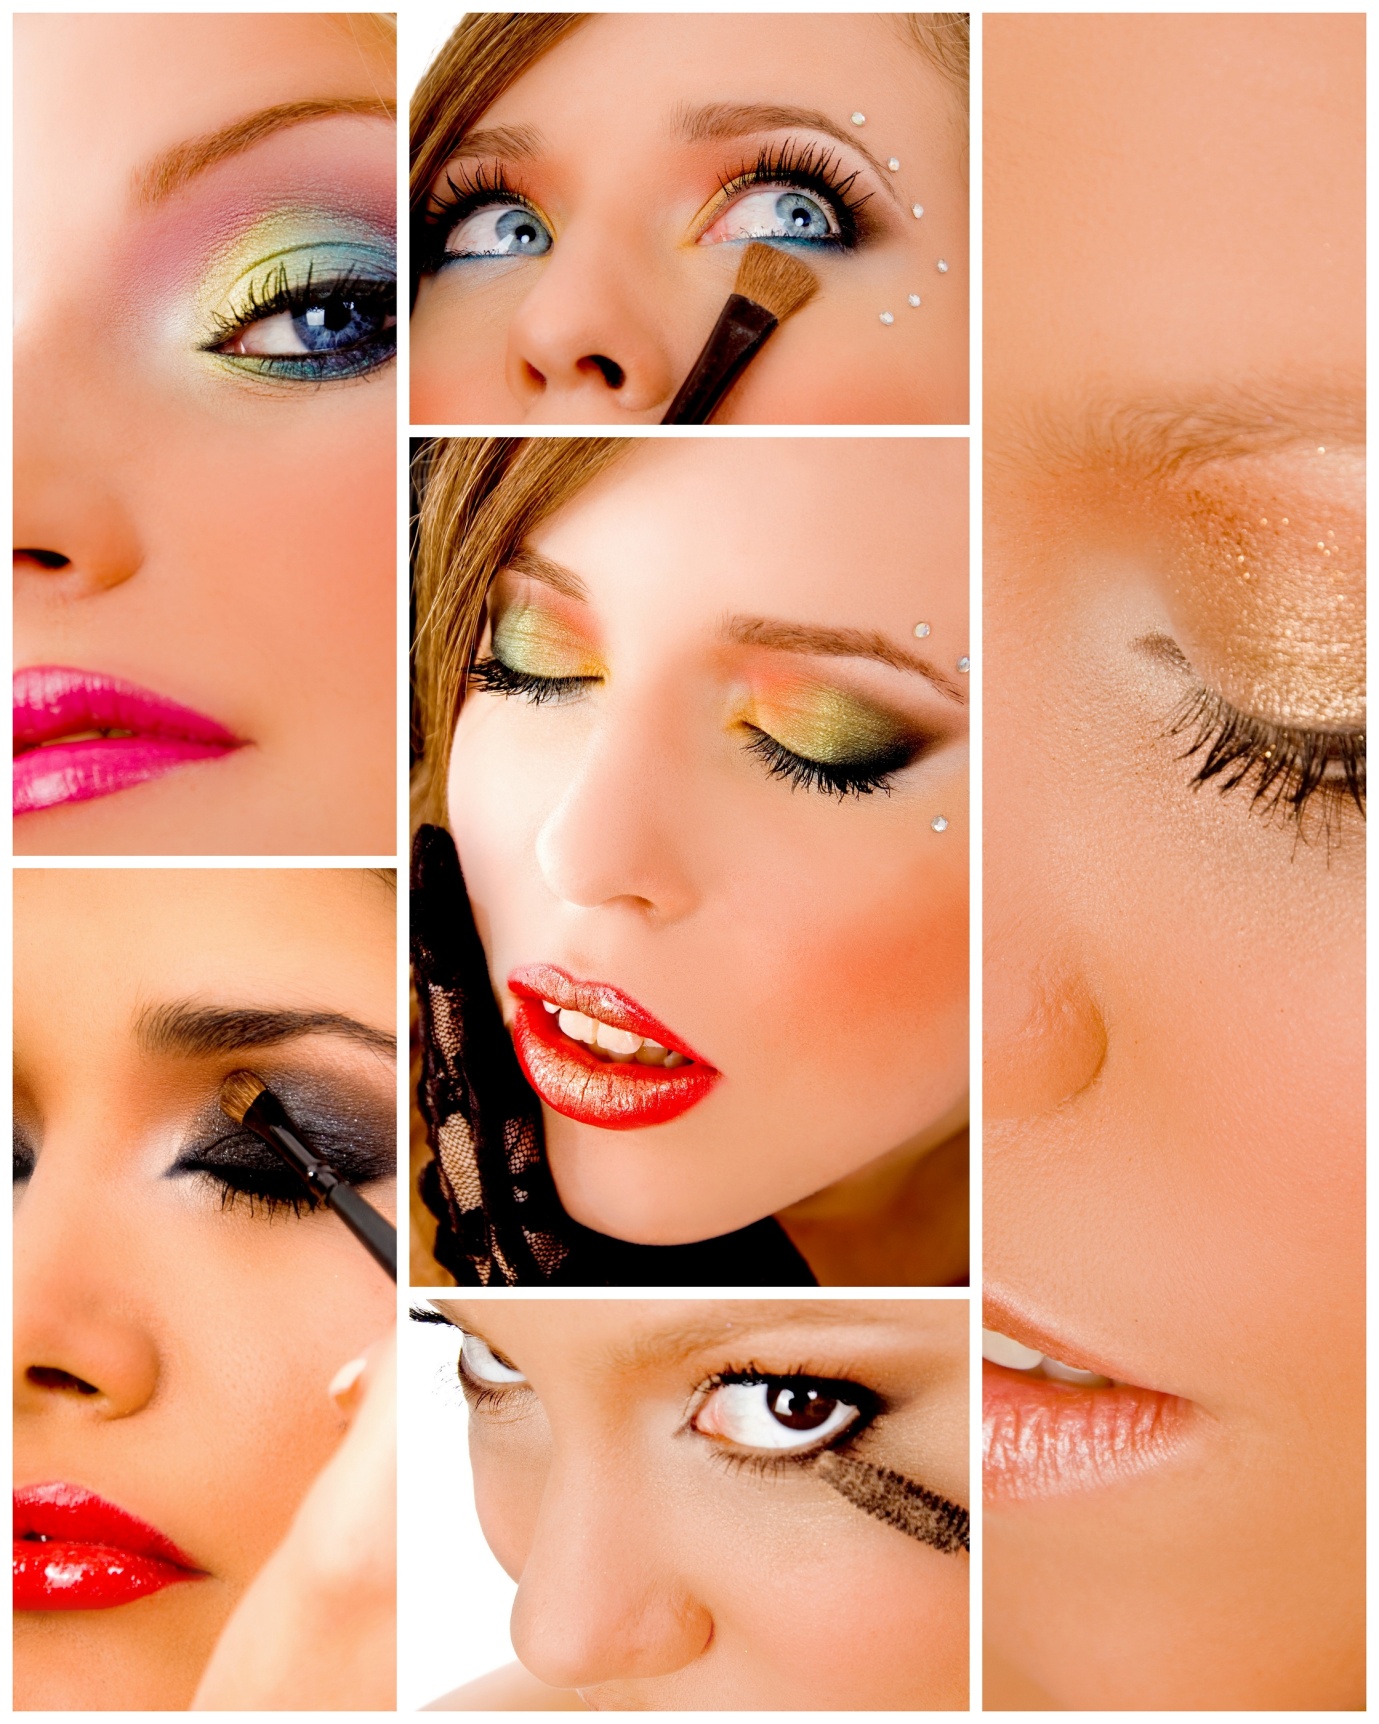 Tips for Healthy Eye Makeup Use